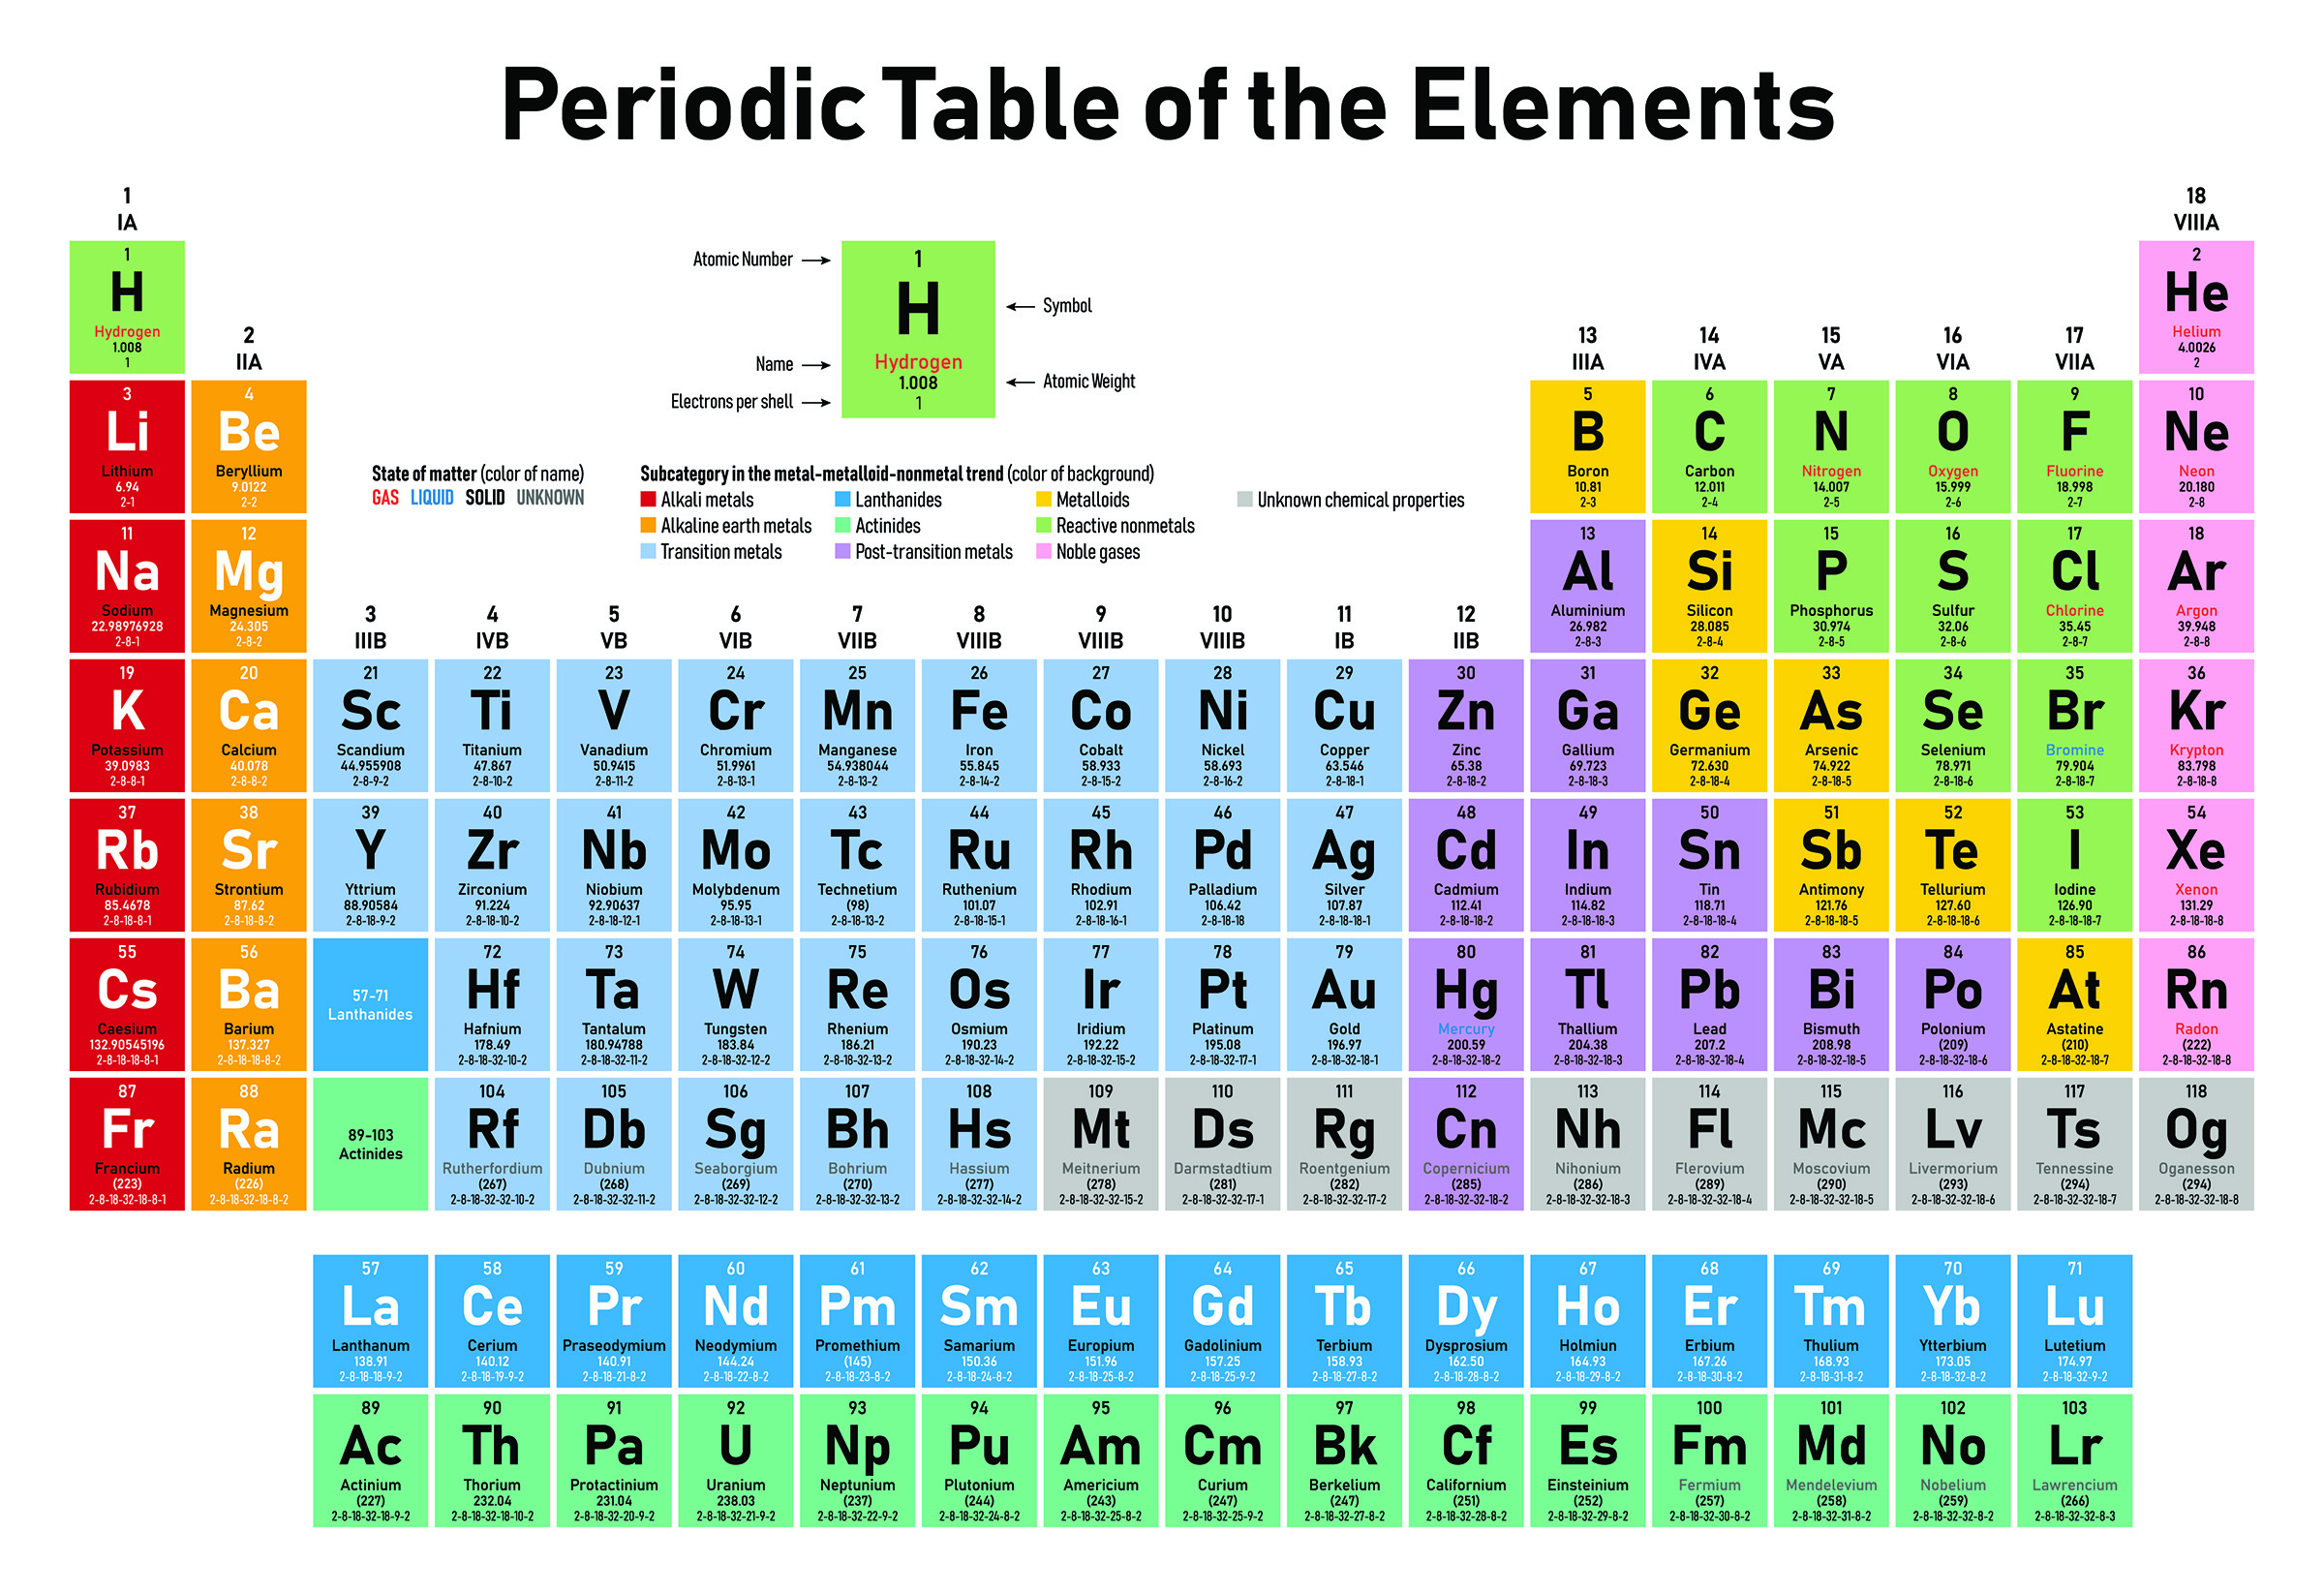 Periodic Table Review